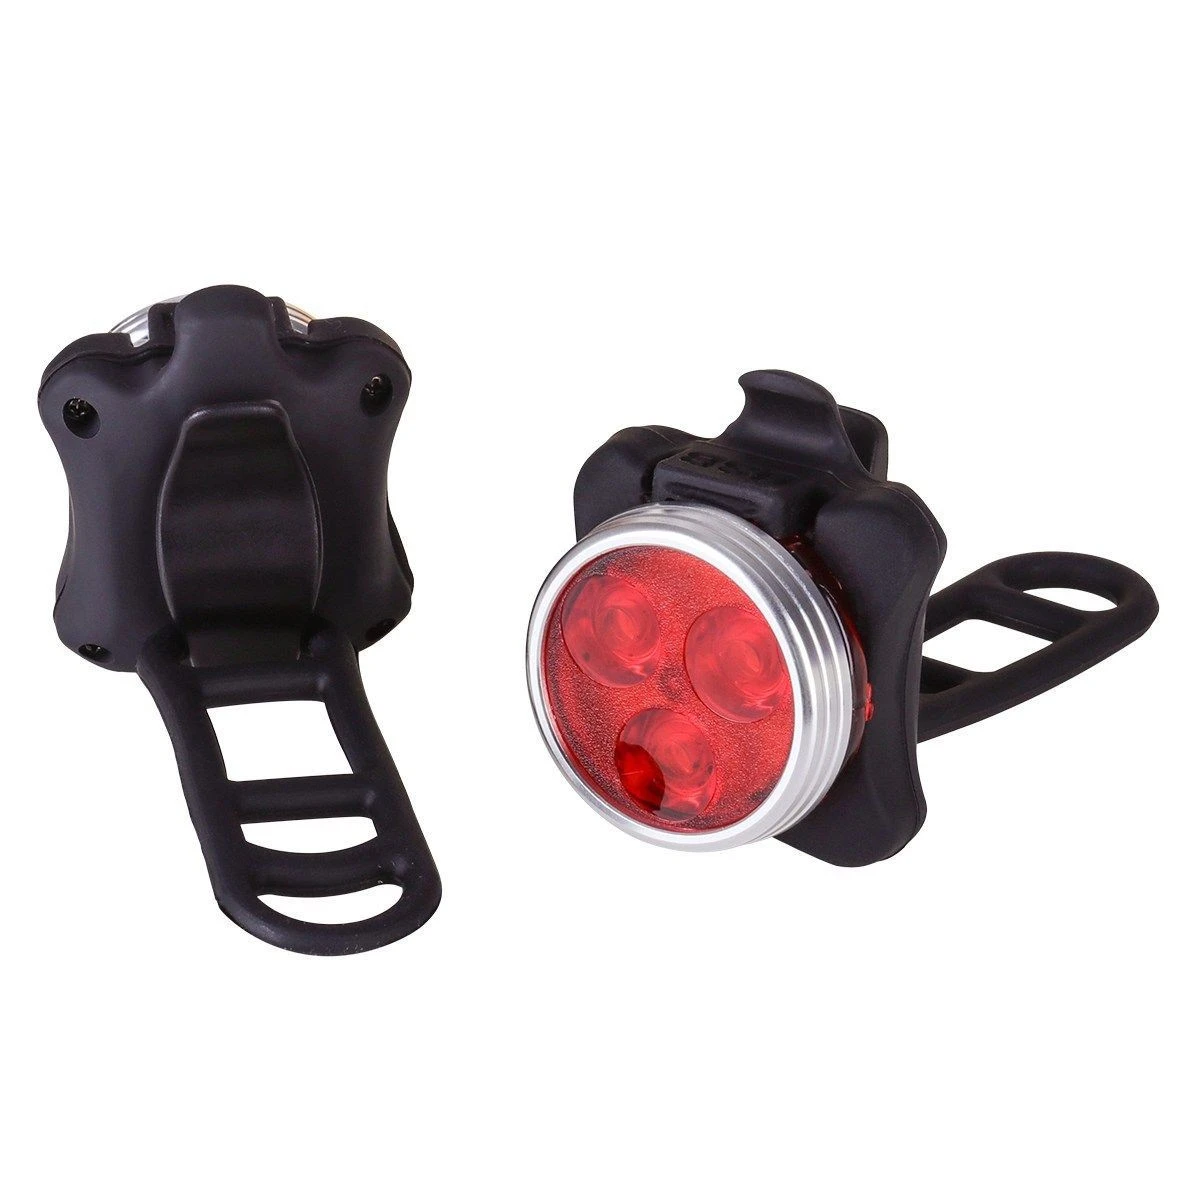 USB Rechargeable Outdoor Camping LED Biker Lights Set Headlight Taillight Caution Front Back Bicycle Lights